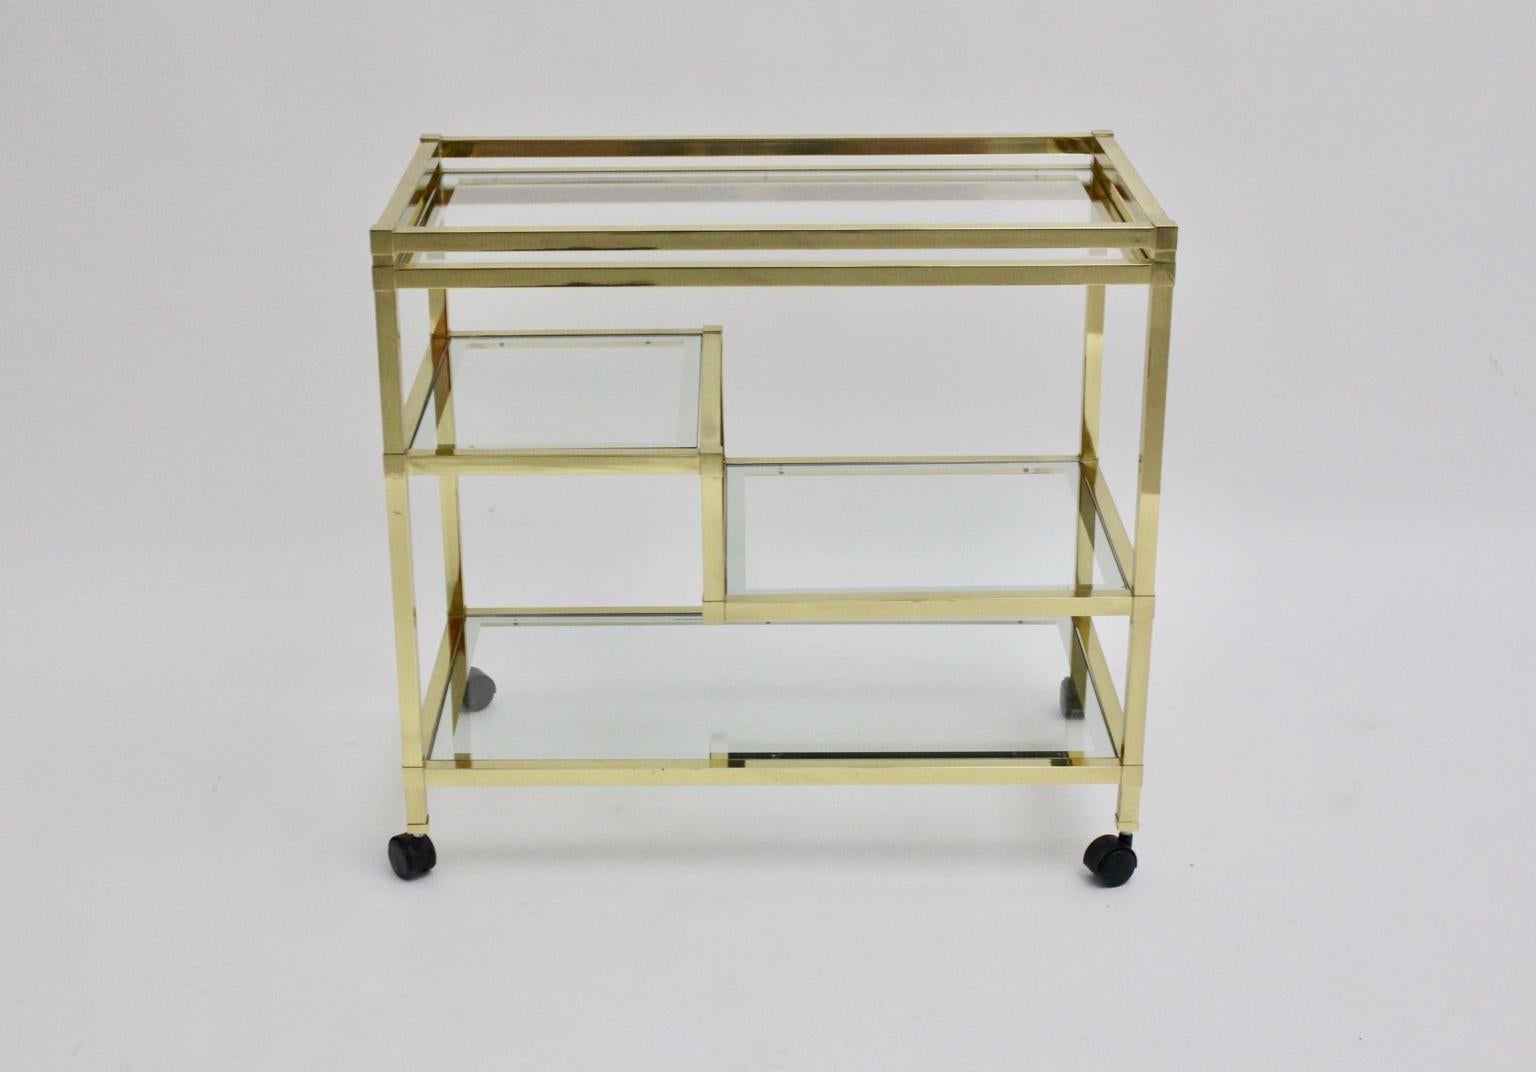 This Bar cart in the style of Romeo Rega consists of a gilded frame construction with four glass plates in various sizes.
The glass plates are surrounded with a silver edging.
Also the bar cart shows 4 wheels for a good mobility.
The vintage